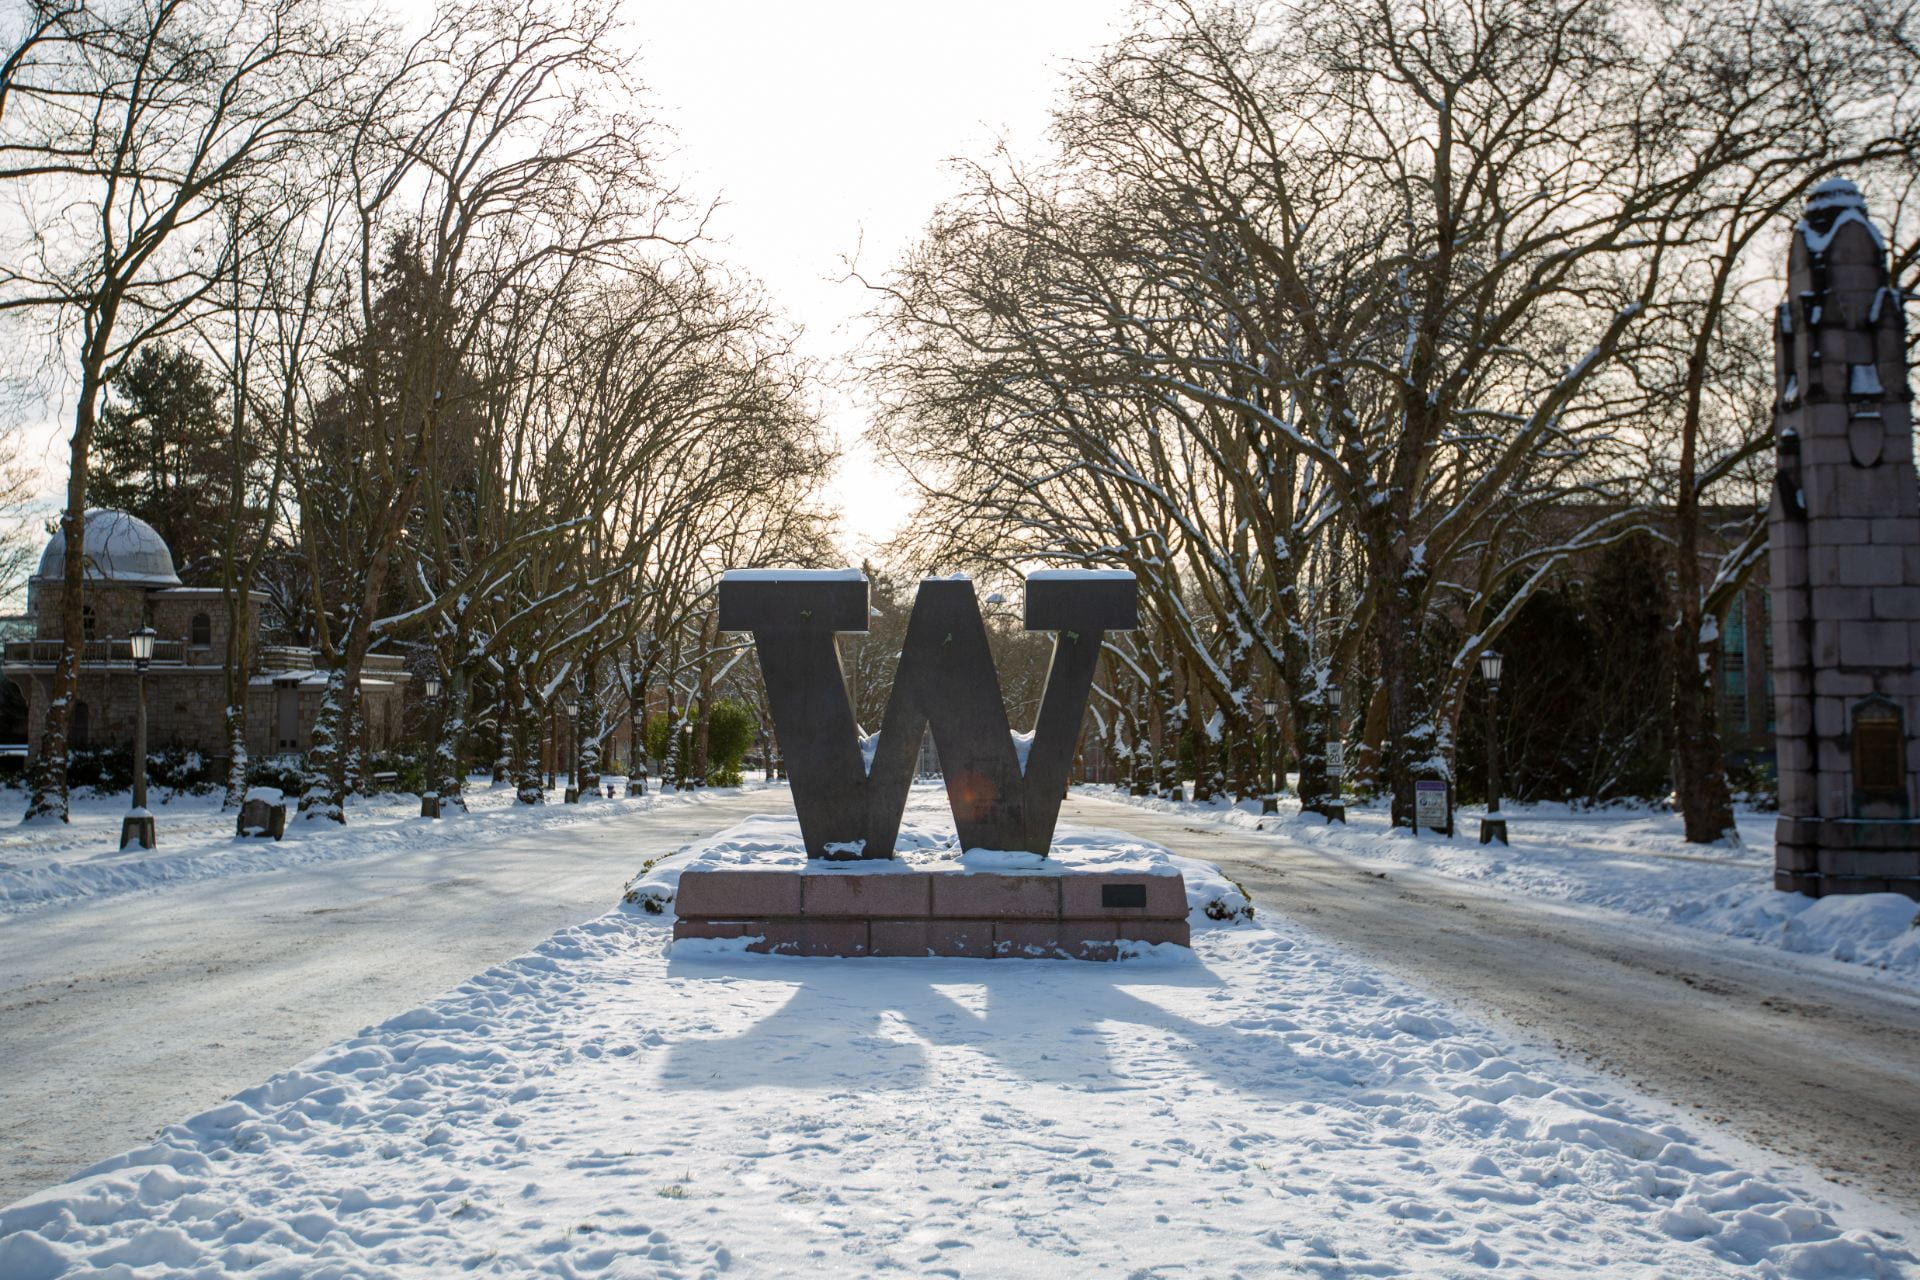 A UW "Block W" surrounded by snow.